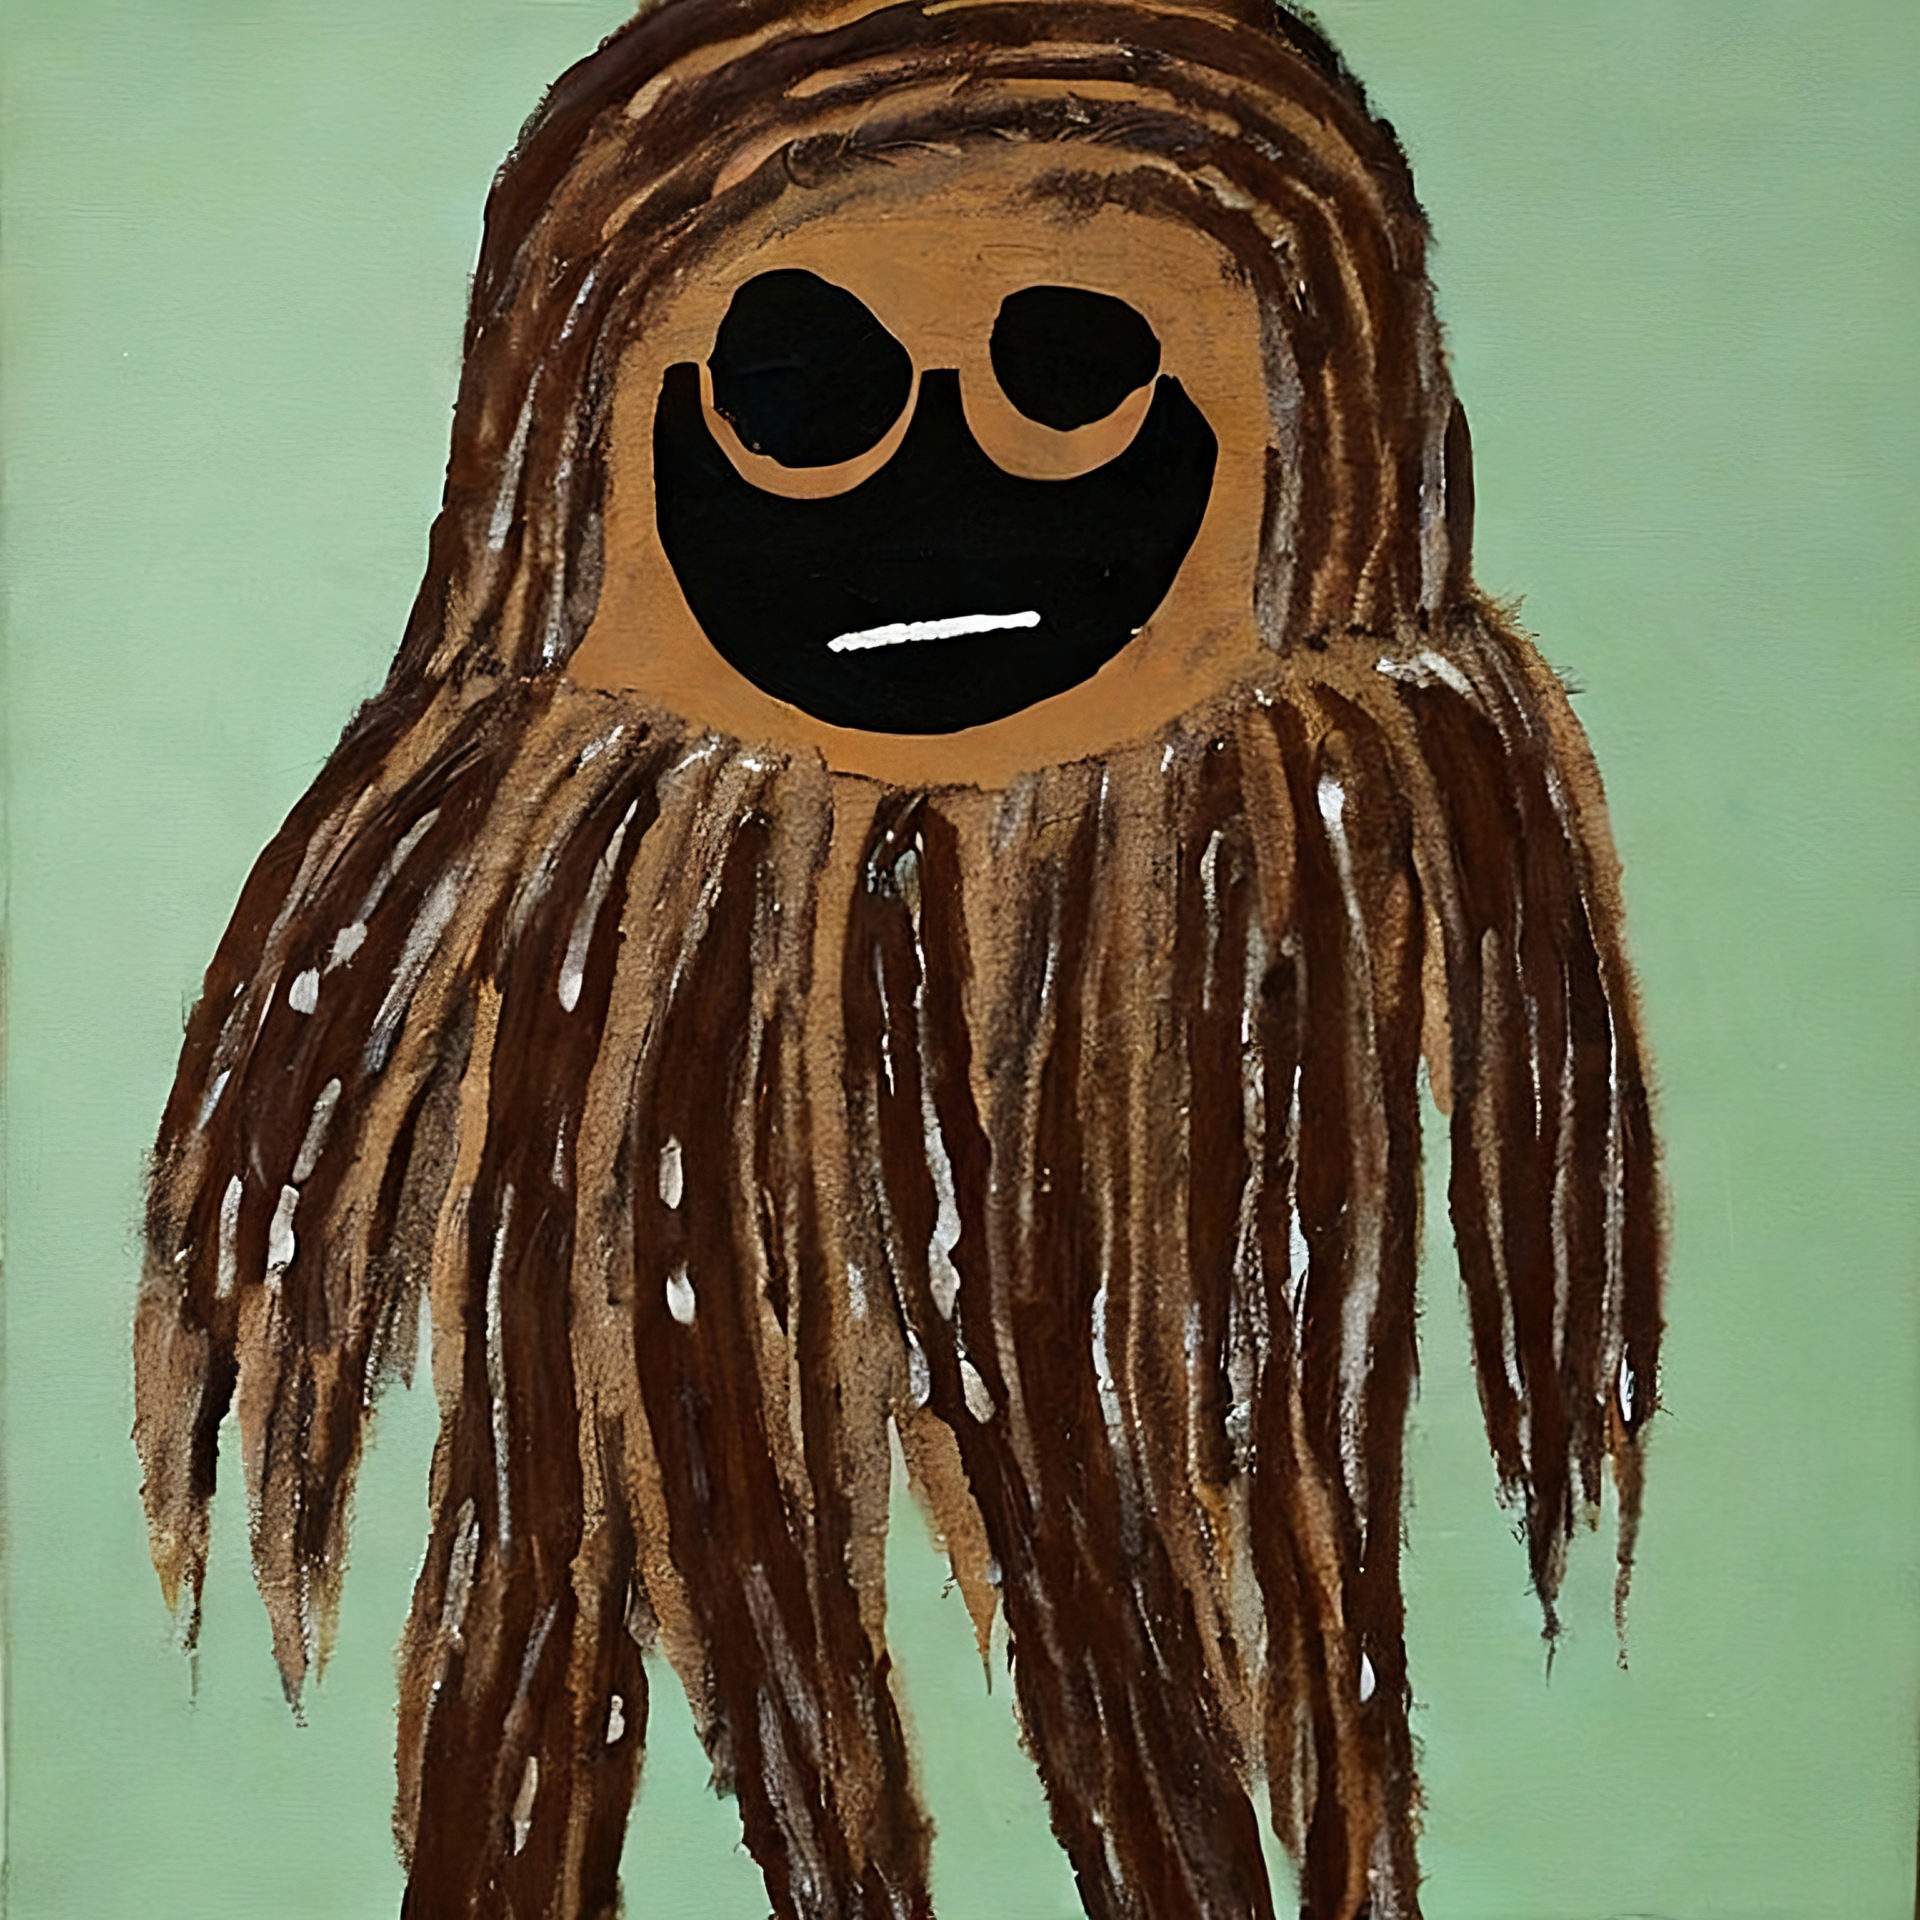 Bold and naive variation of Chewbacca